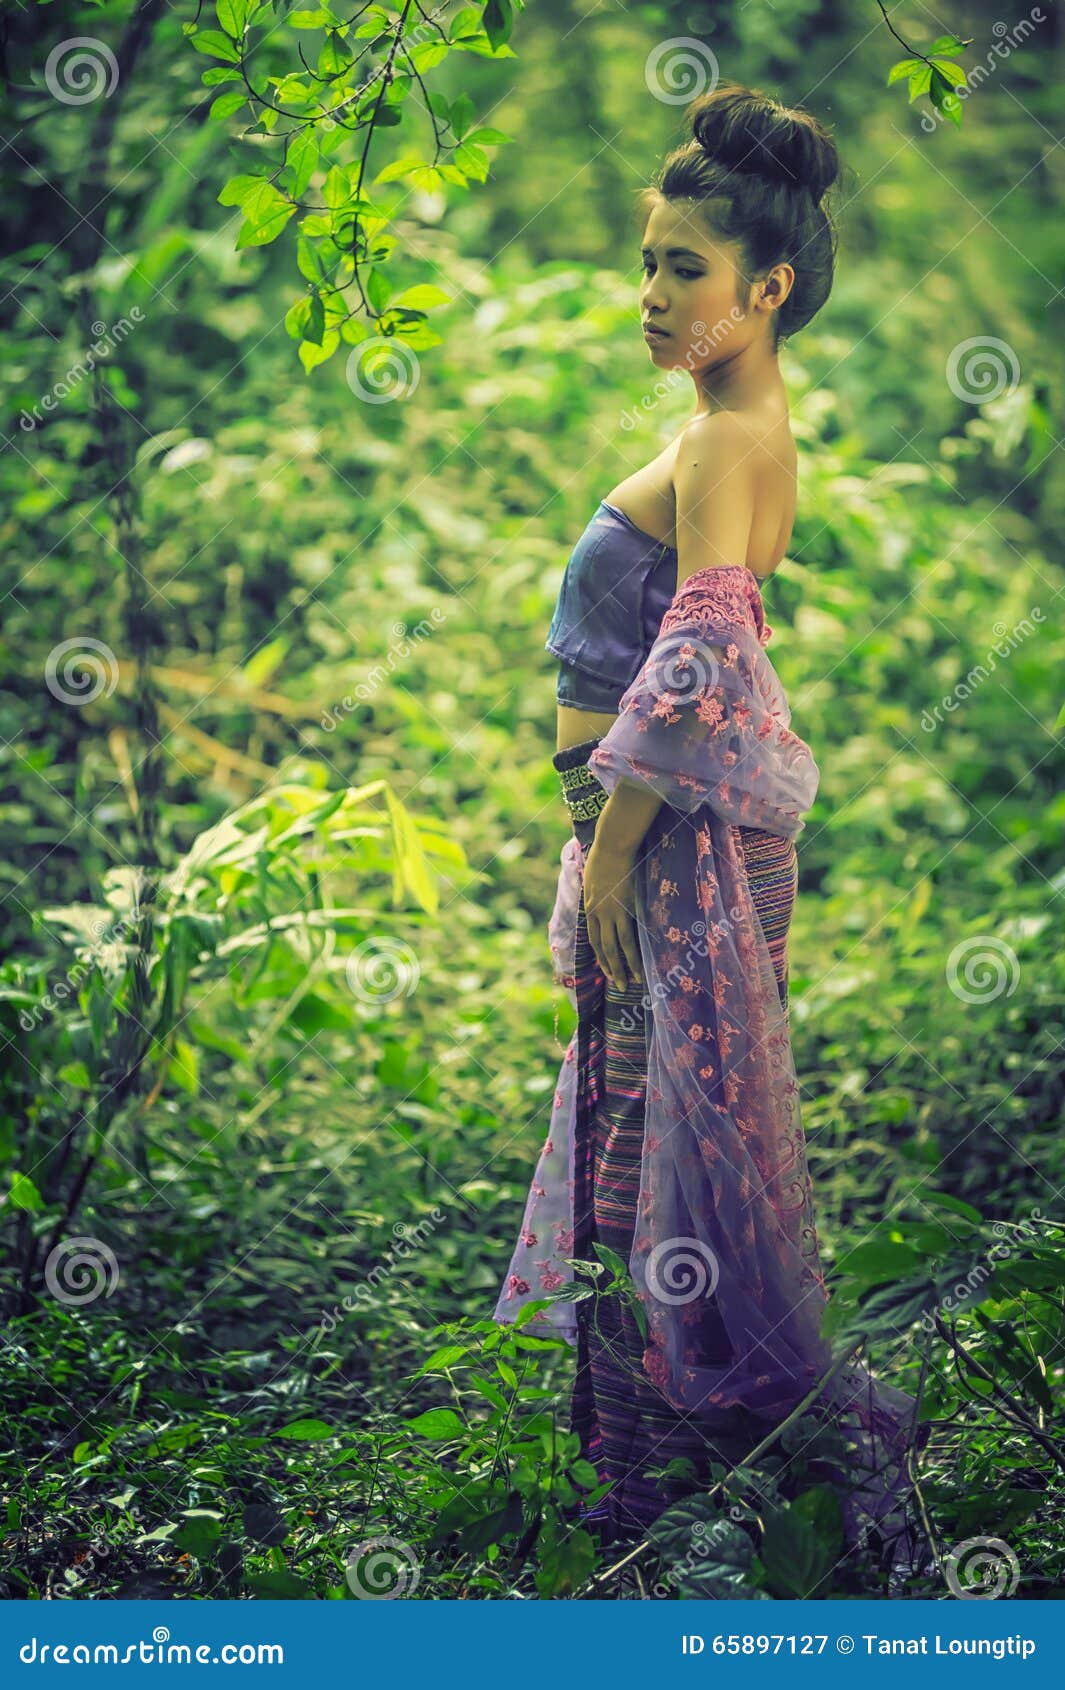 Asian Woman Wearing Thai Lanna Series Identity Culture Of Thailand Stock Image Image Of Girl